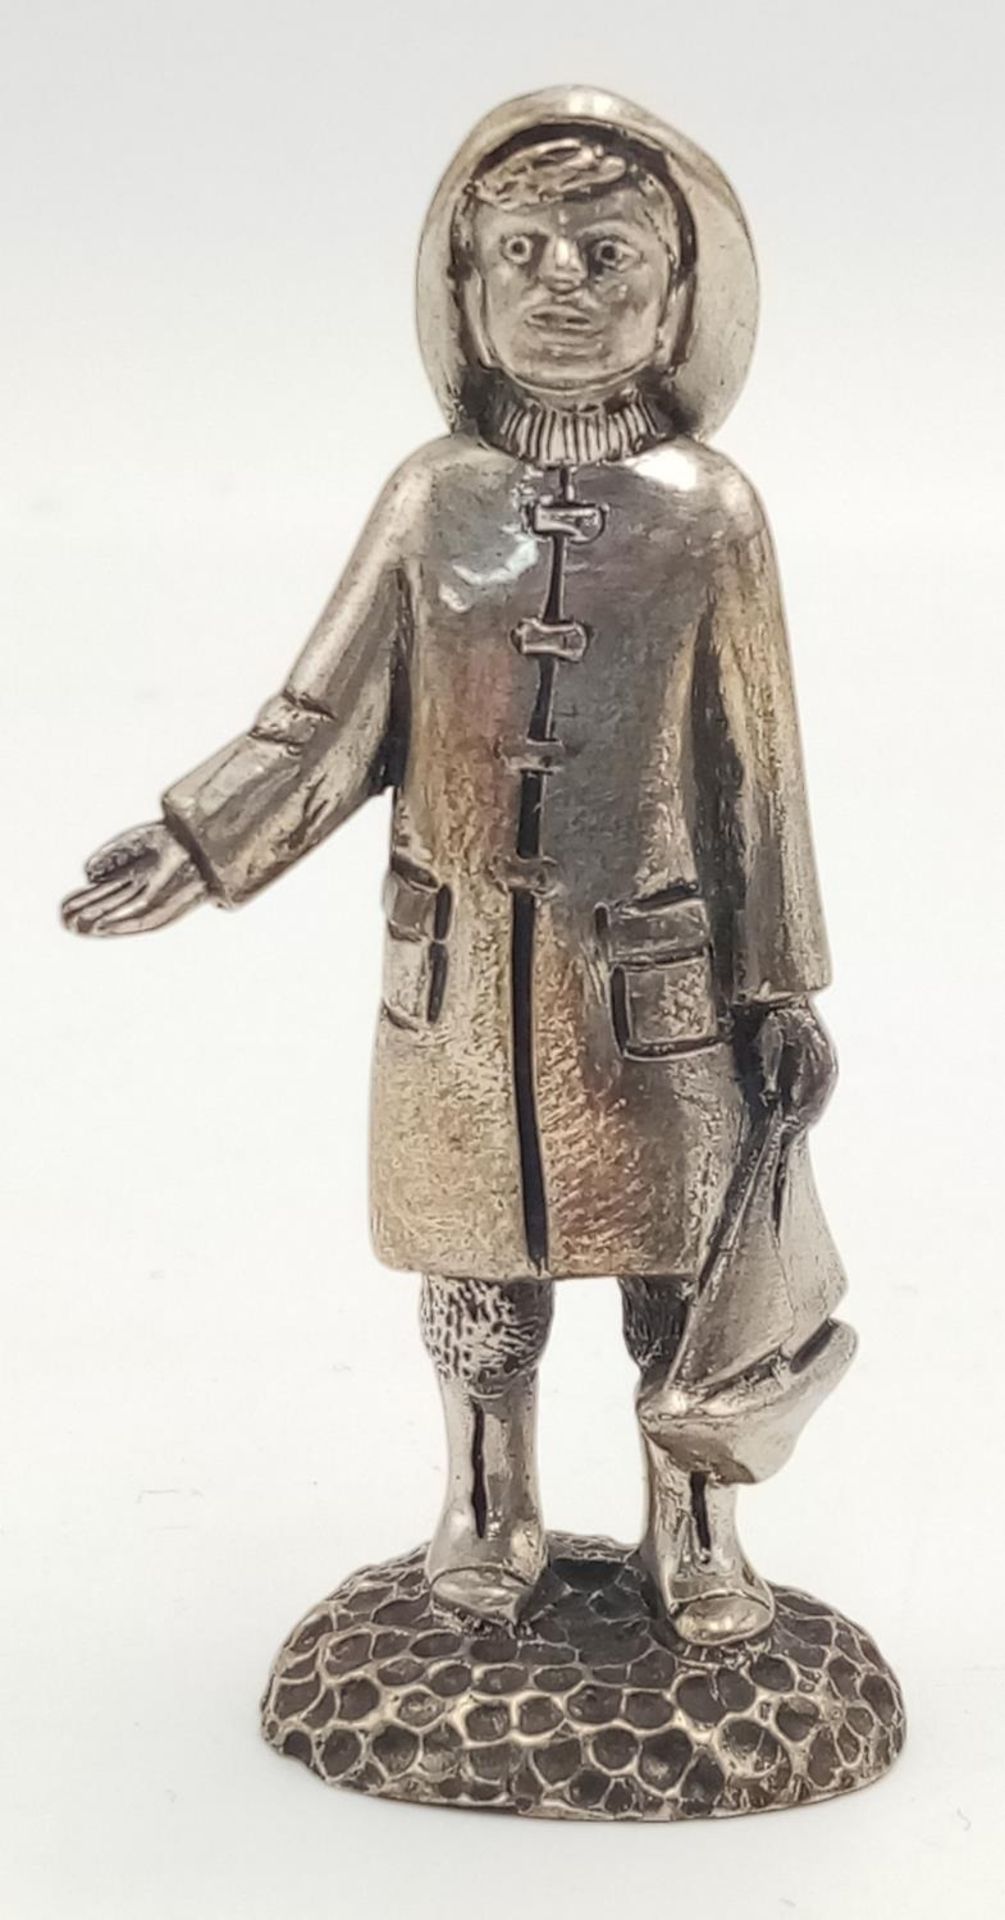 A STERLING SILVER (TESTED AS) FIGURE OF A YOUNG BOY IN RAIN JACKET AND HAT WITH A BOAT POSSIBLY